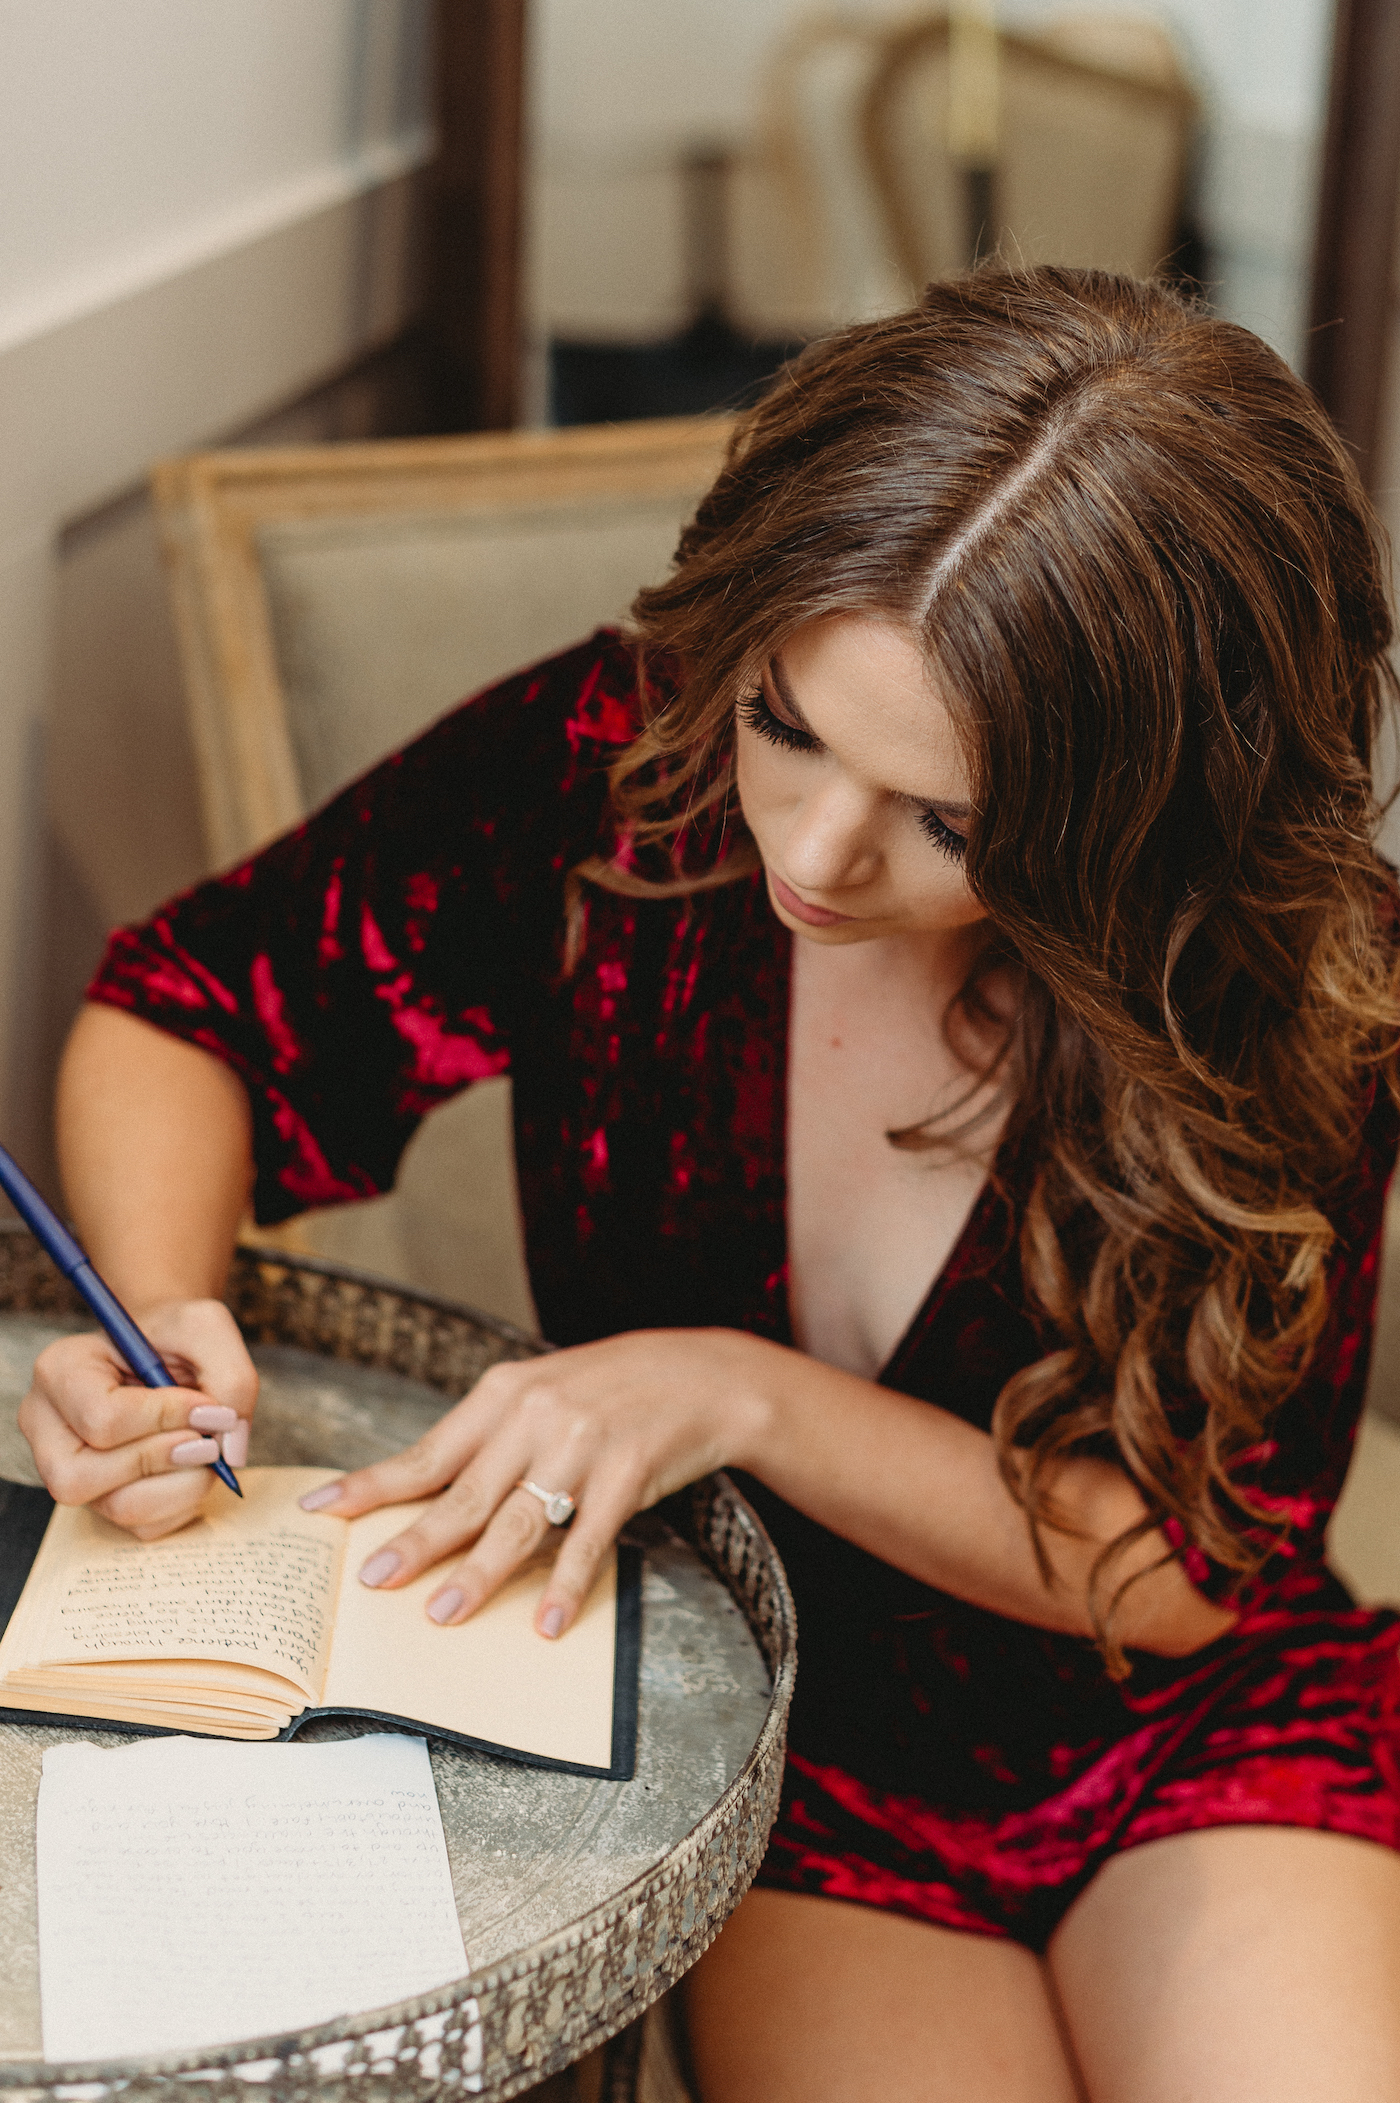 Bride Getting Ready For Wedding and Writing Own Vows | Wedding Vow Book